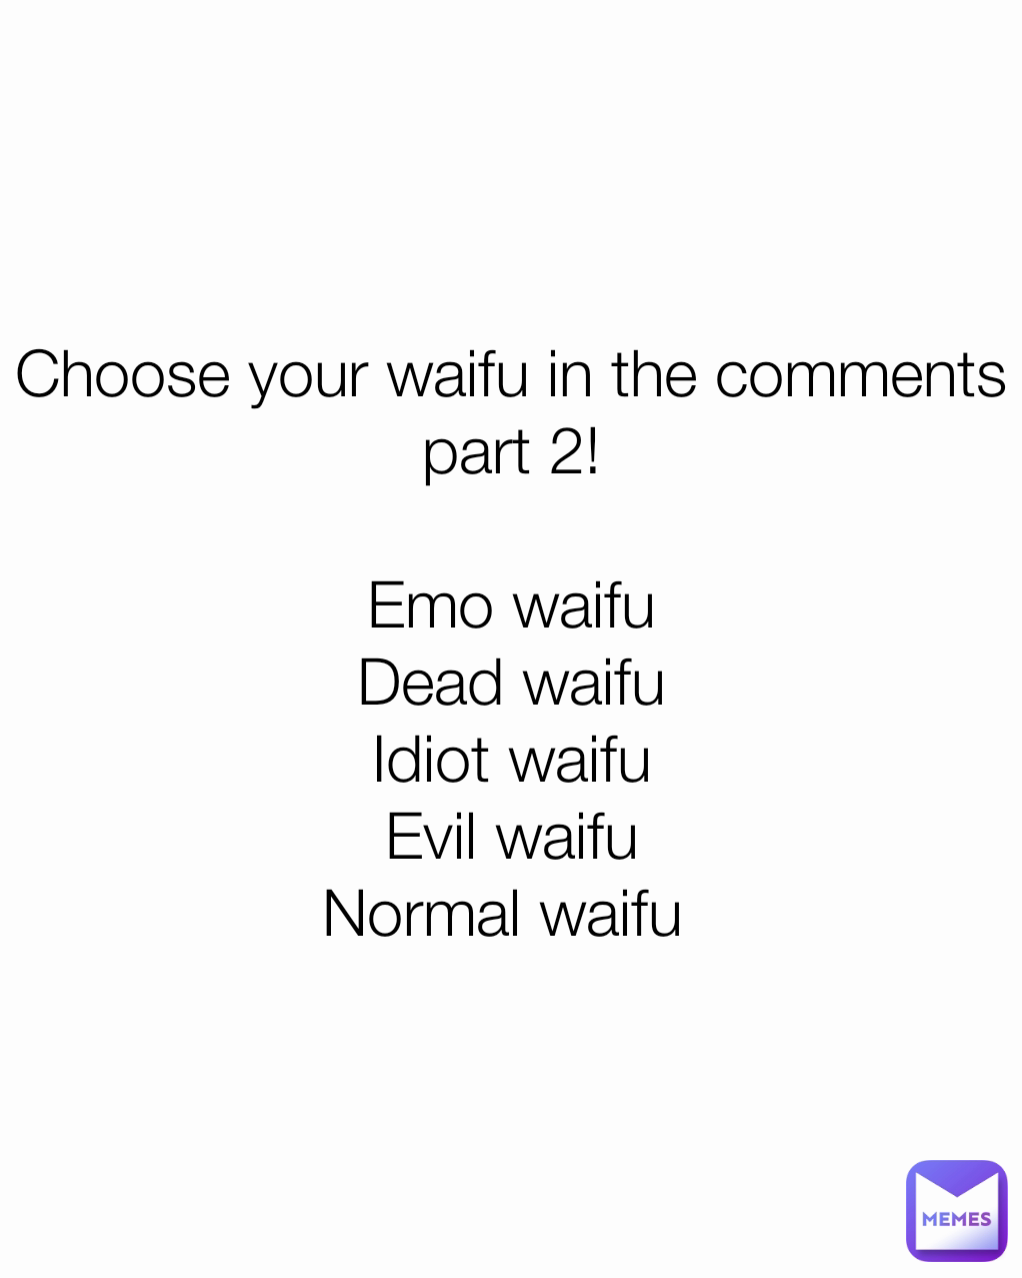 Choose your waifu in the comments part 2!

Emo waifu
Dead waifu
Idiot waifu
Evil waifu
Normal waifu 